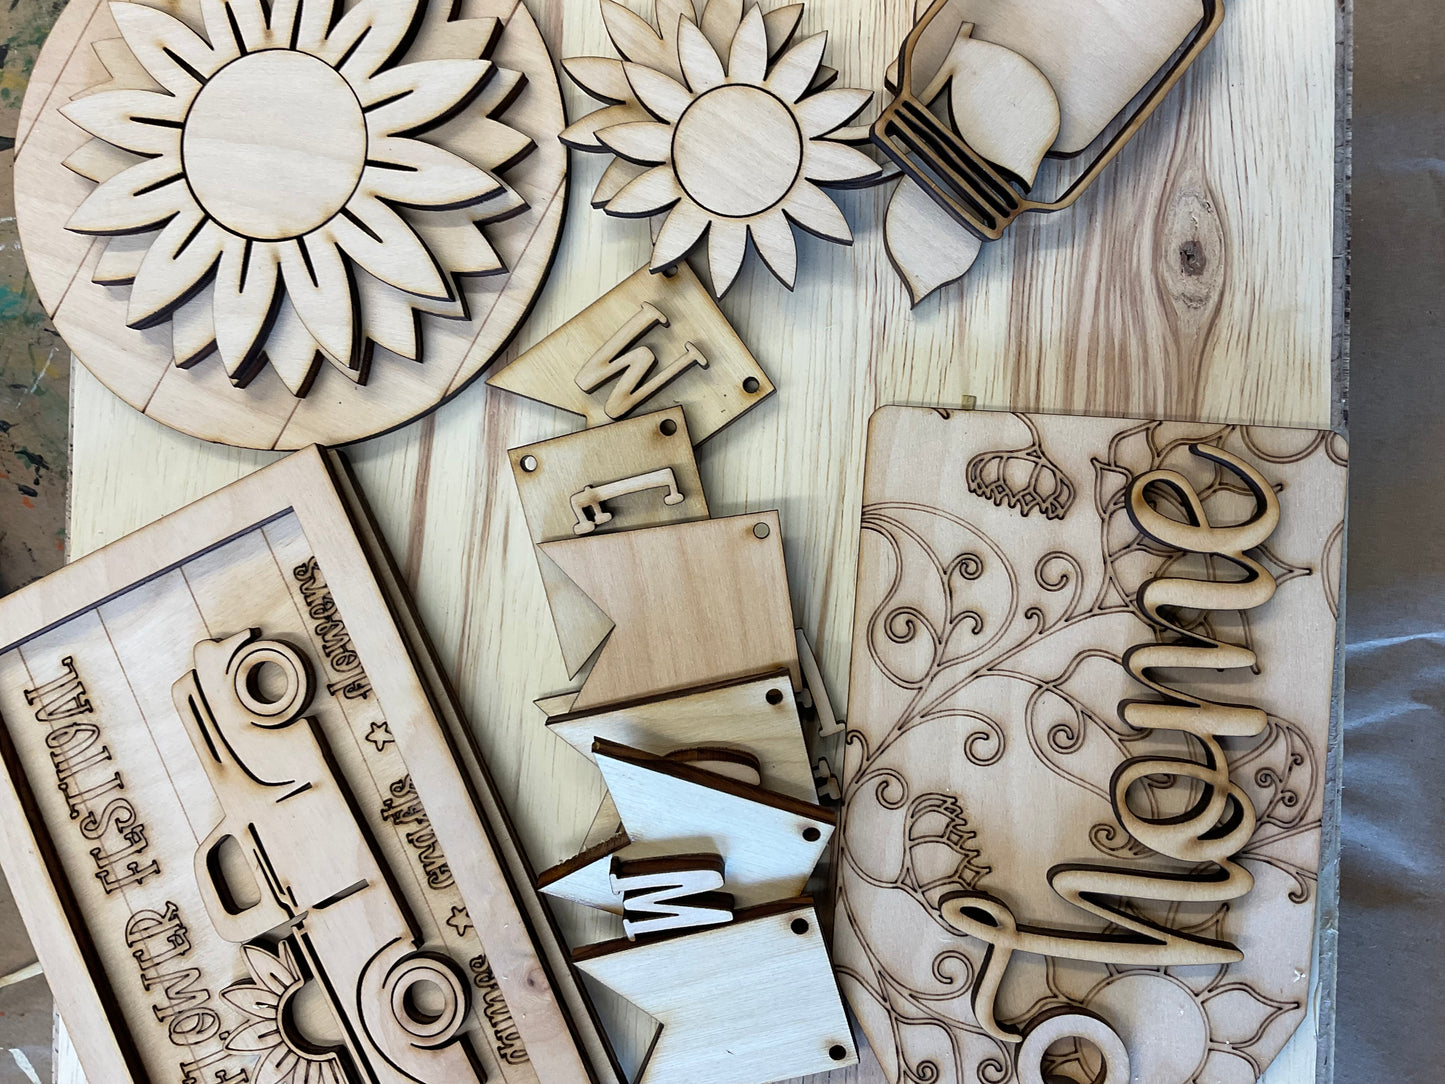 Sunflower tier tray kit DIY, wood pieces only